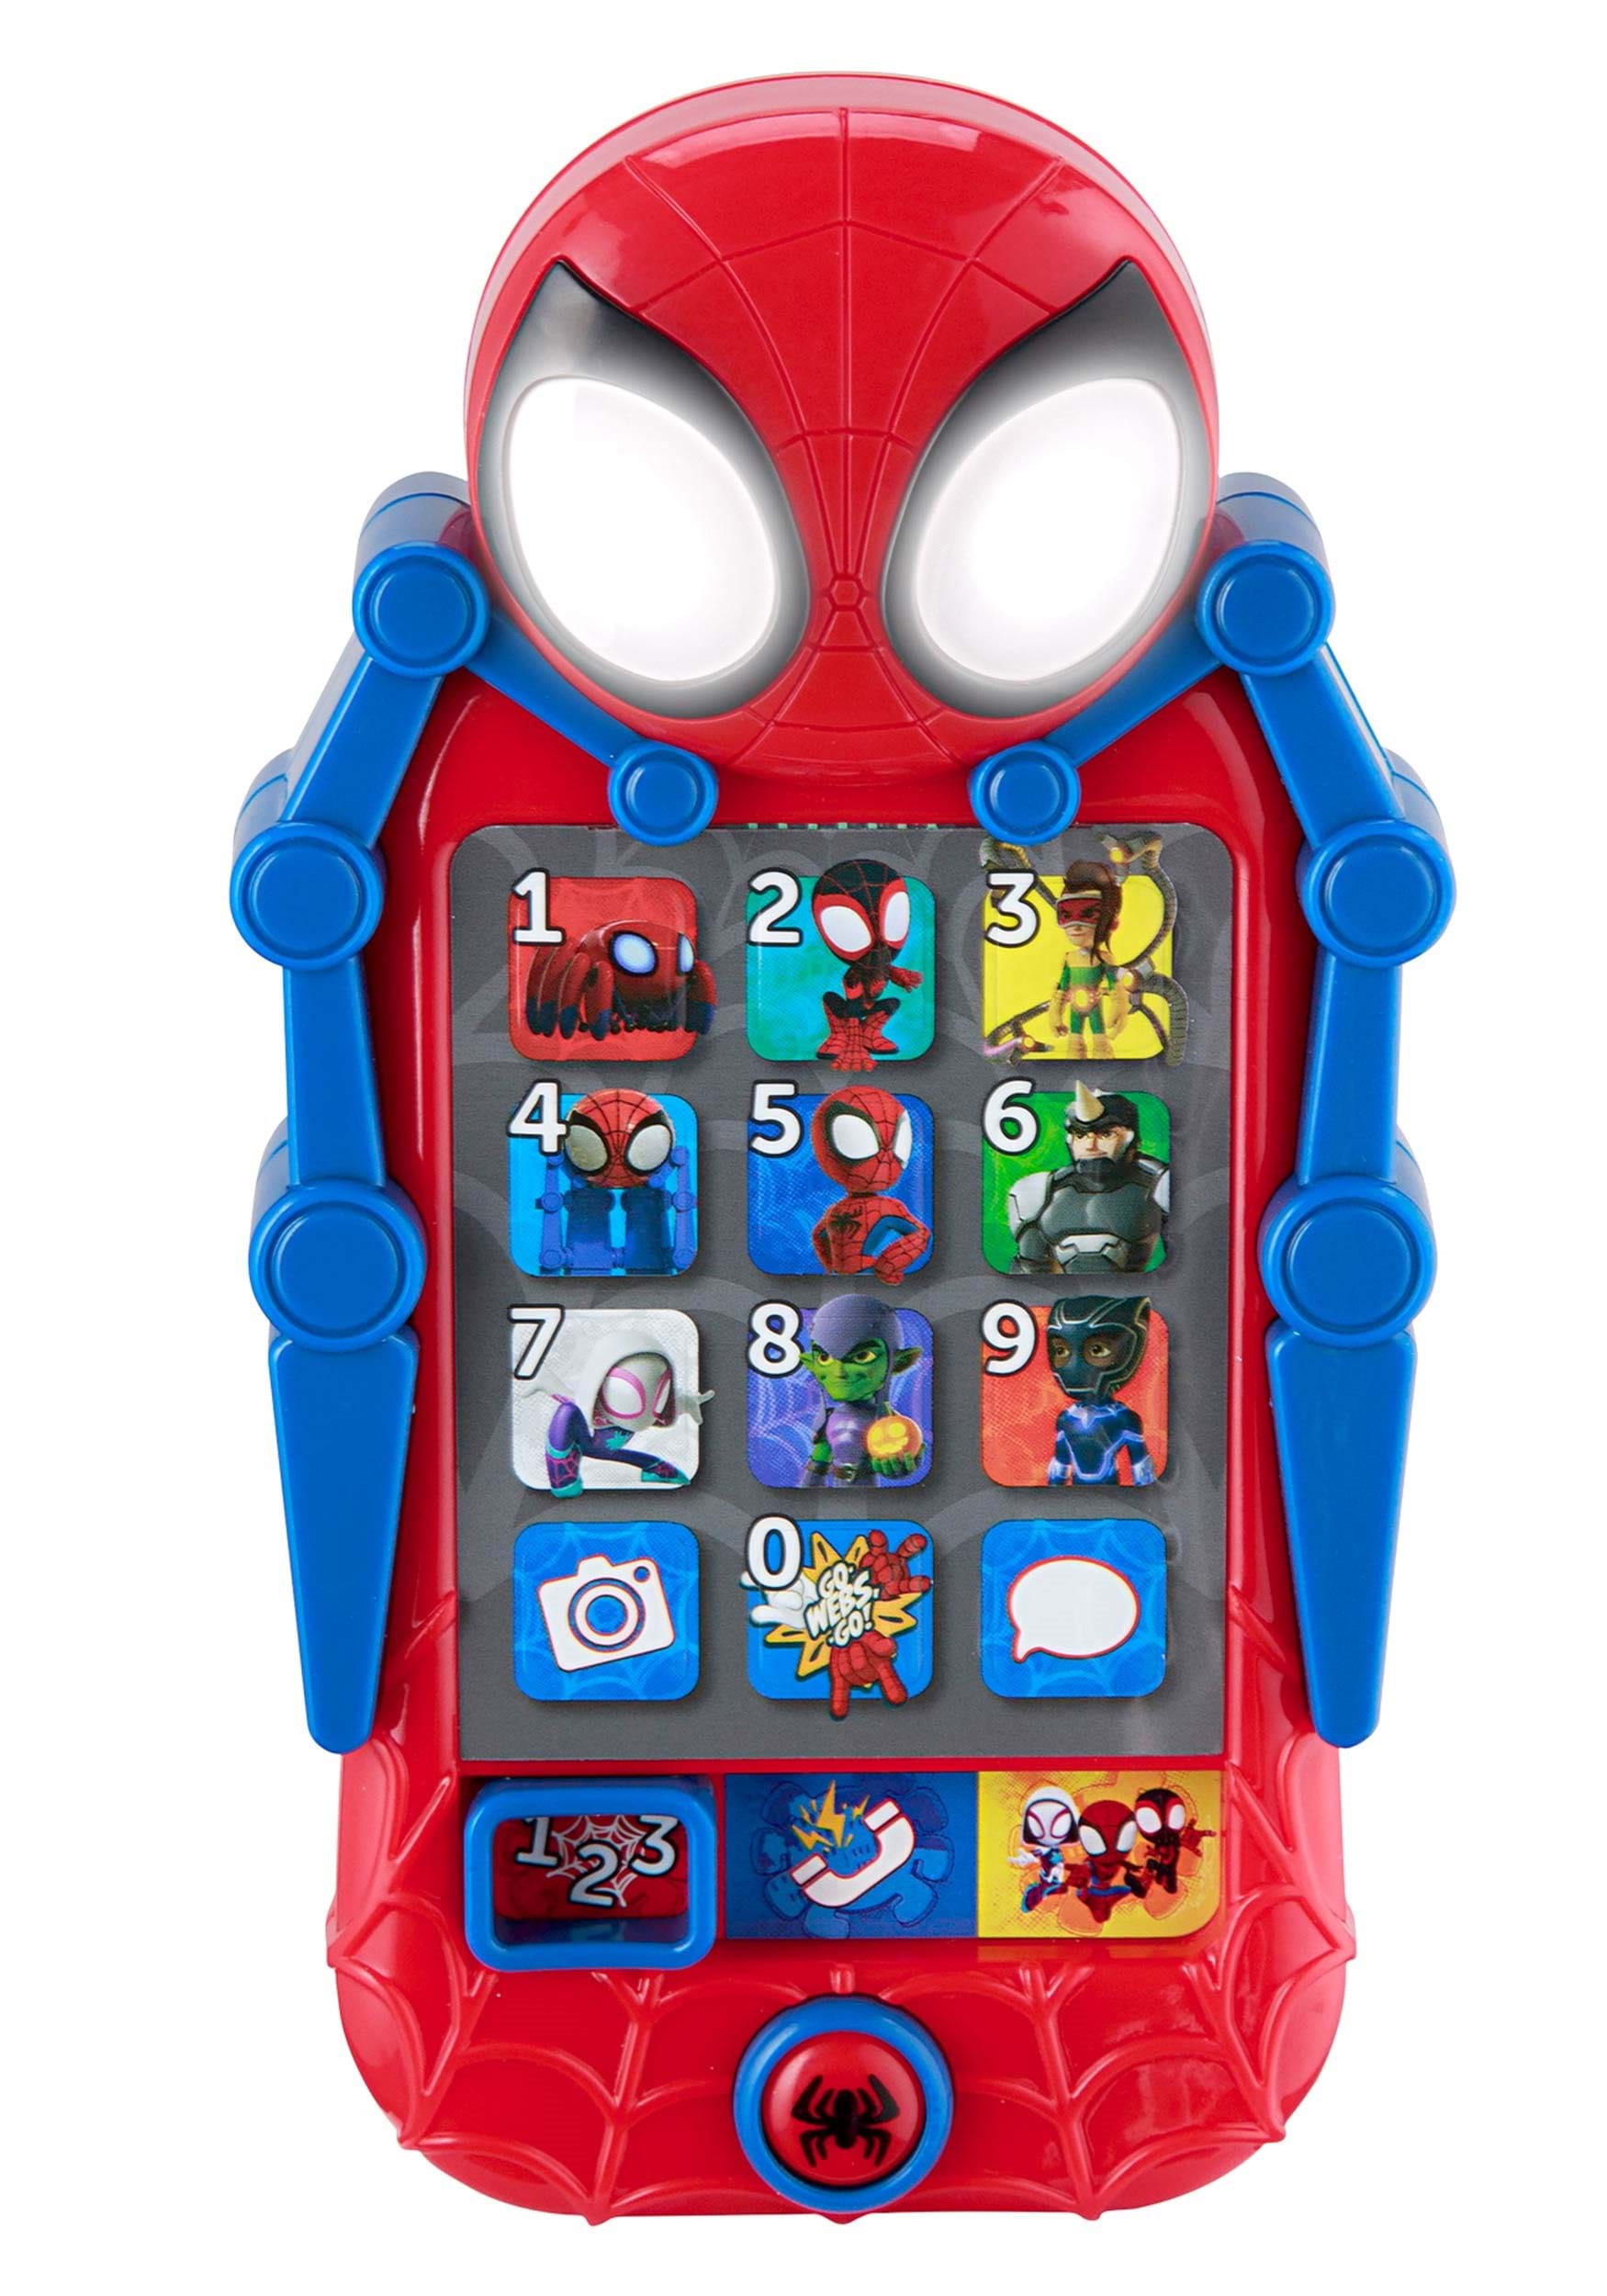 https://images.fun.com/products/77061/1-1/spidey-and-his-amazing-friends-learn-and-play-smart-phone.jpg